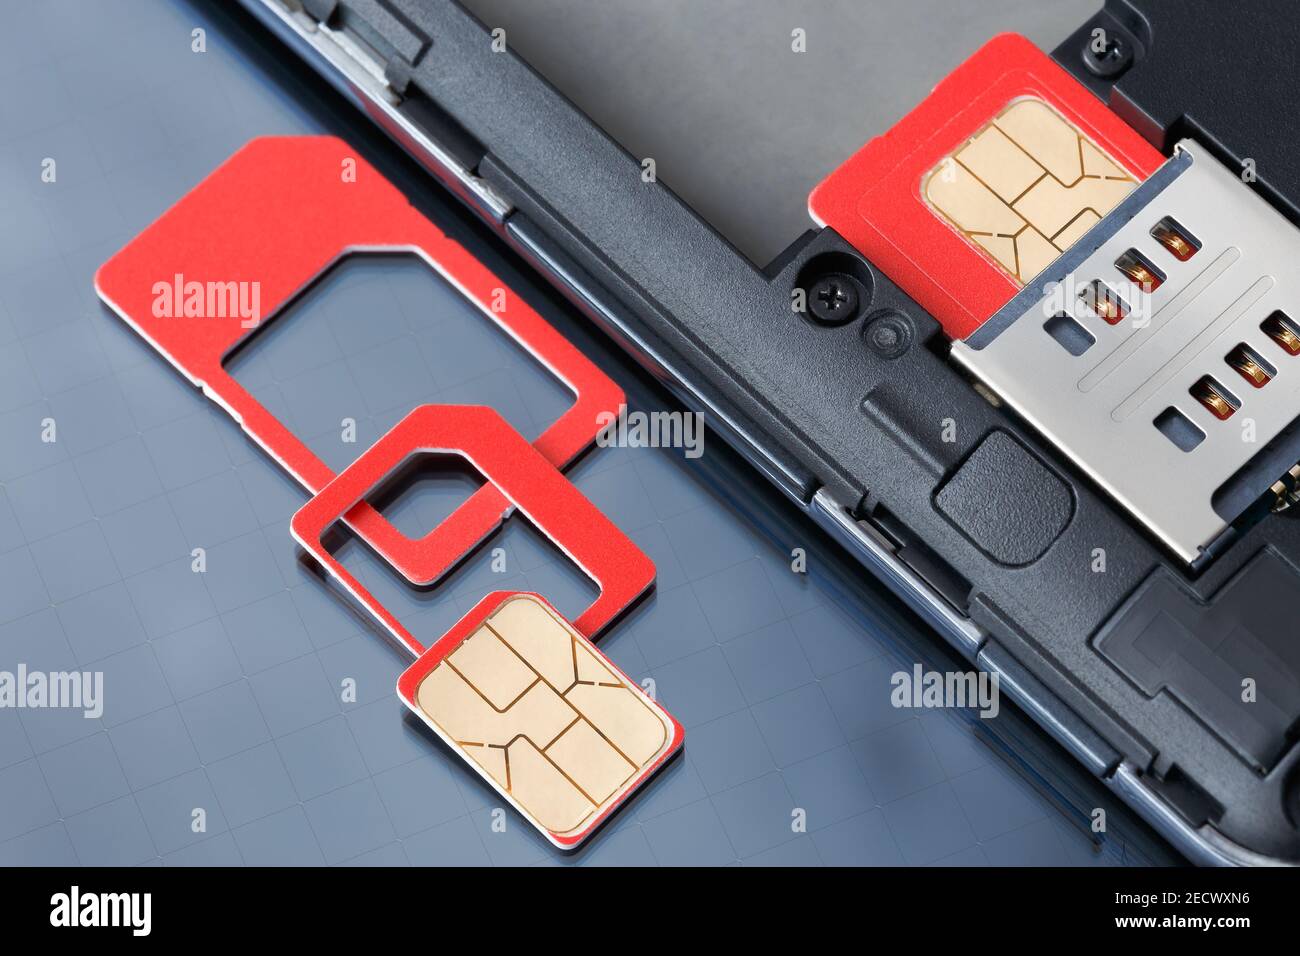 Cell phone with inserted SIM card and SIM card with frames of various sizes. Stock Photo